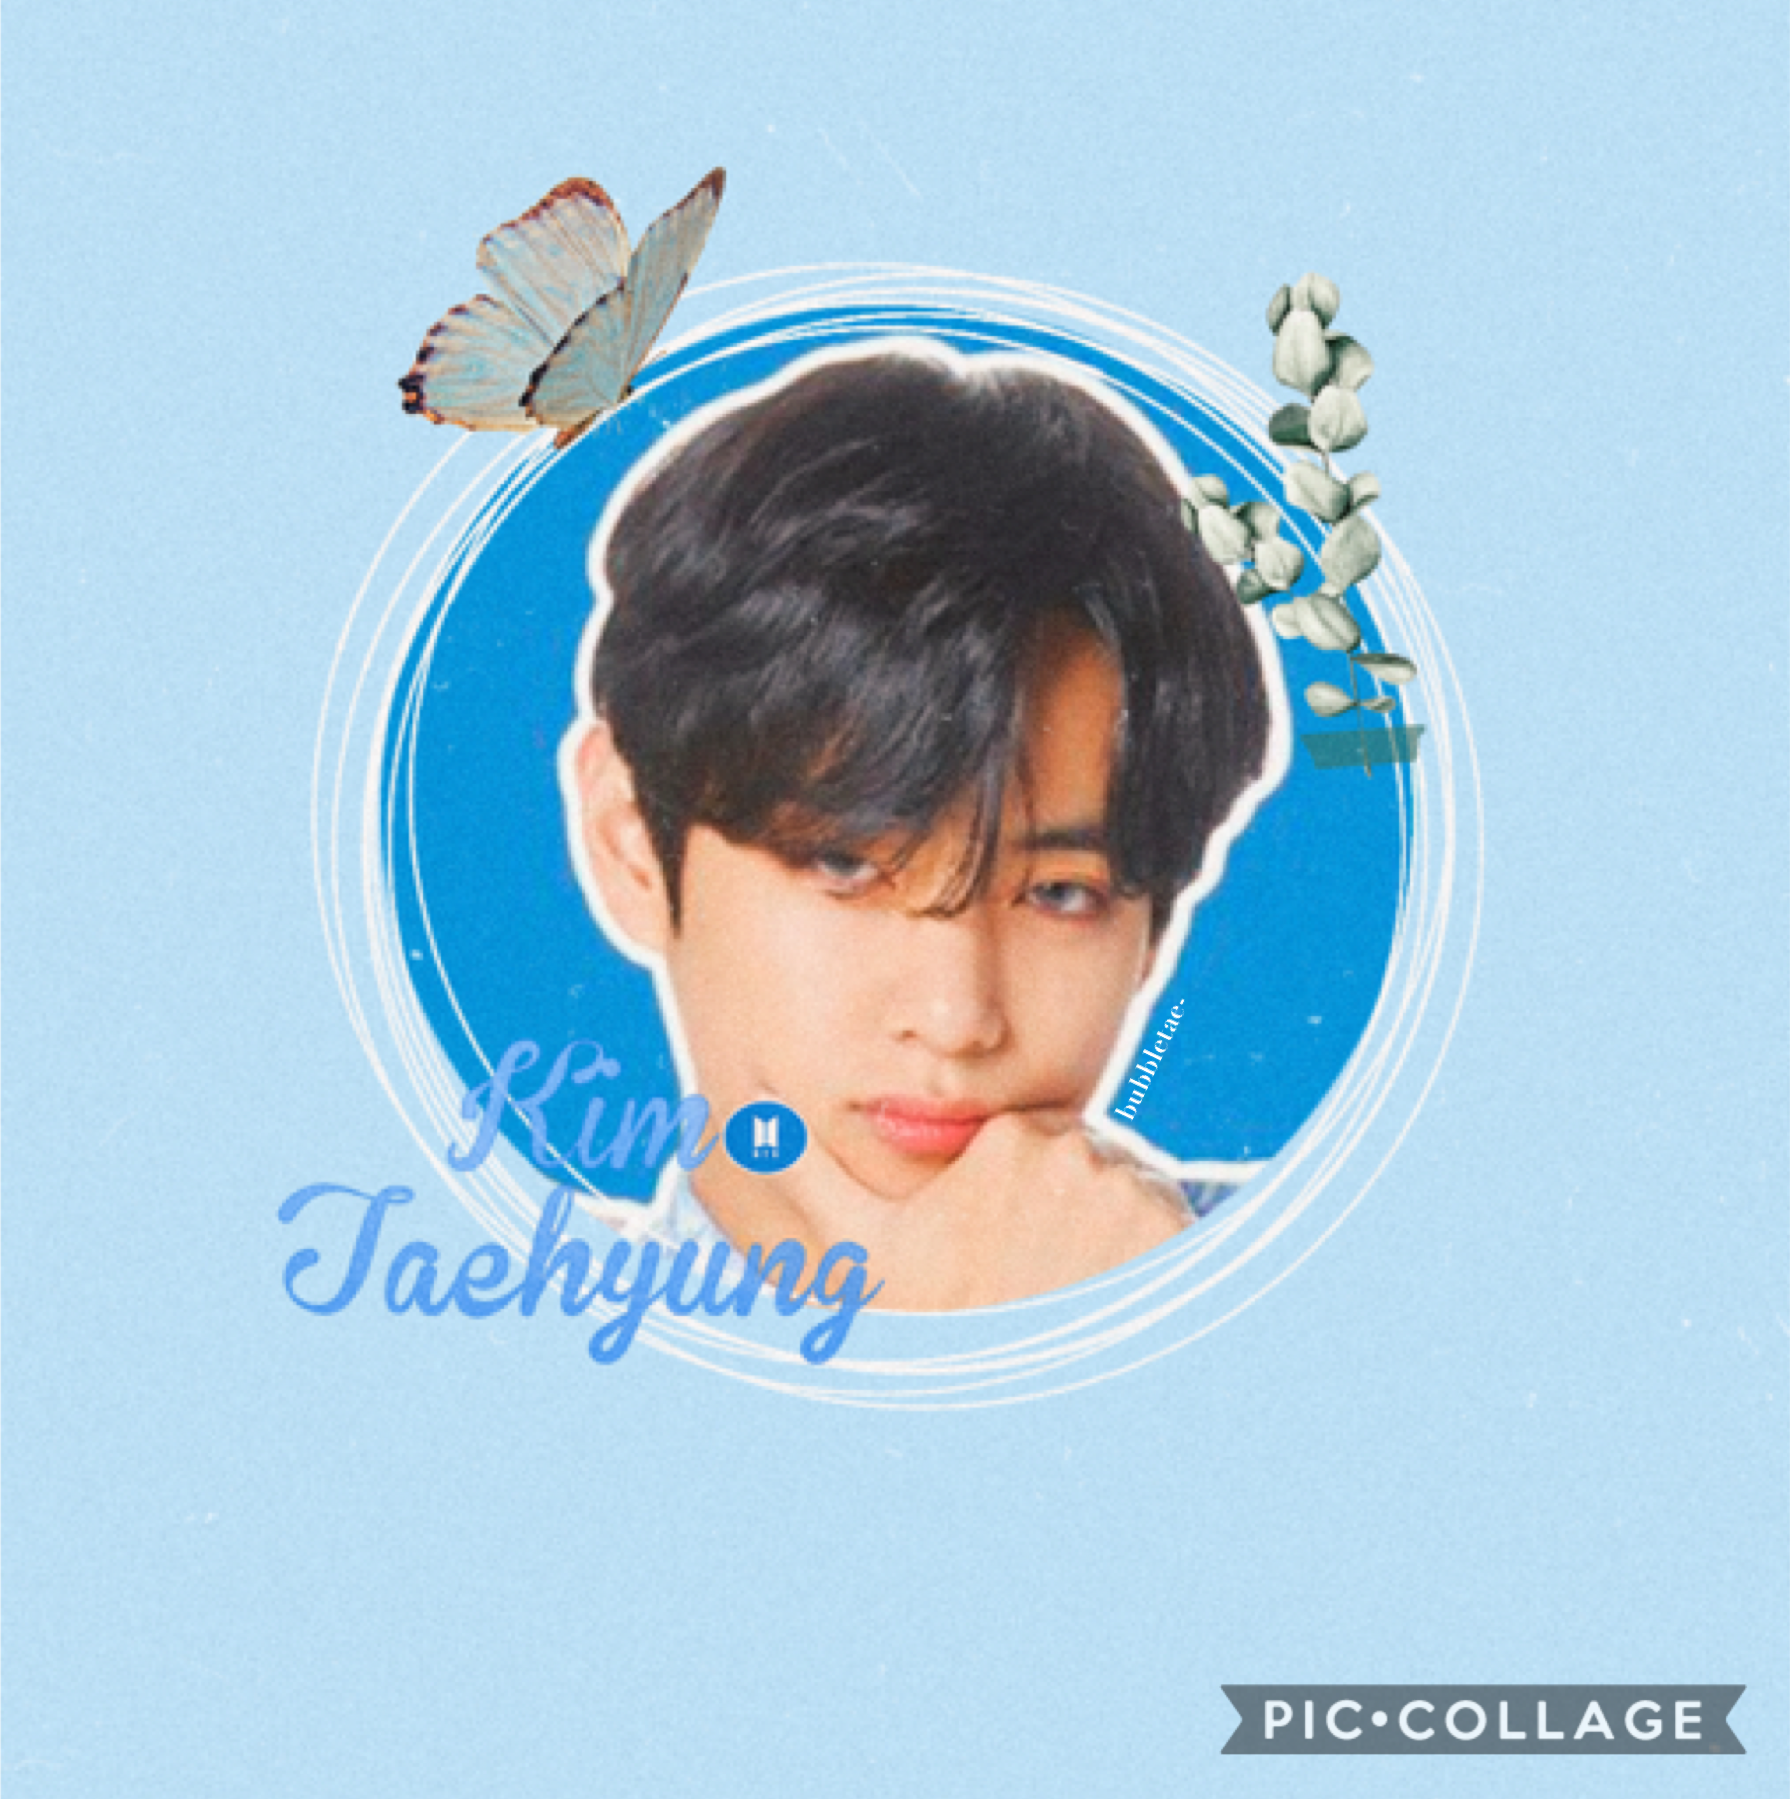 🦋
i made another one since i rlly like the other one! 😁

borahae 💜